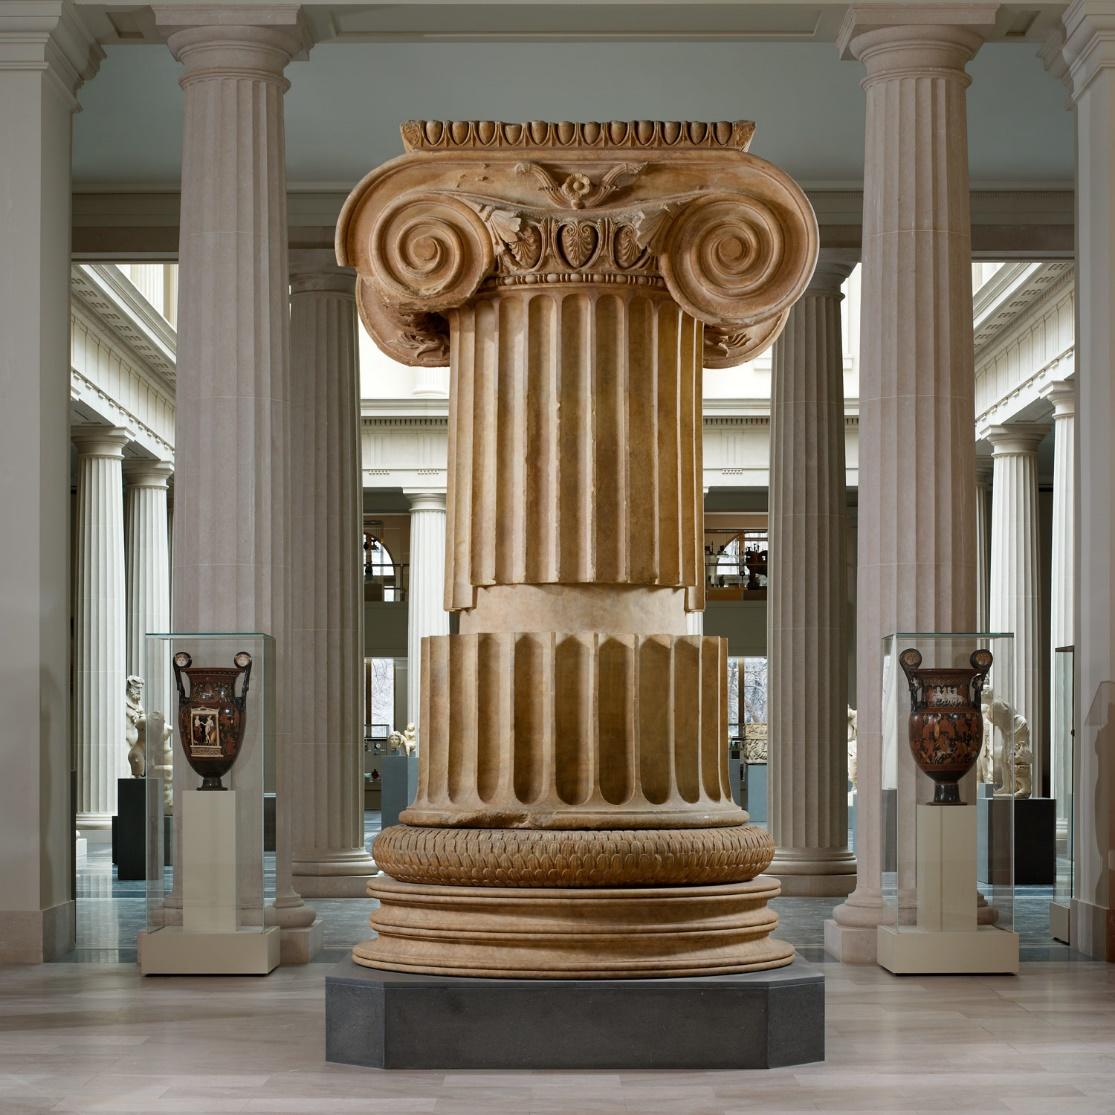 Marble Column from the Temple of Artemis at Sardi.